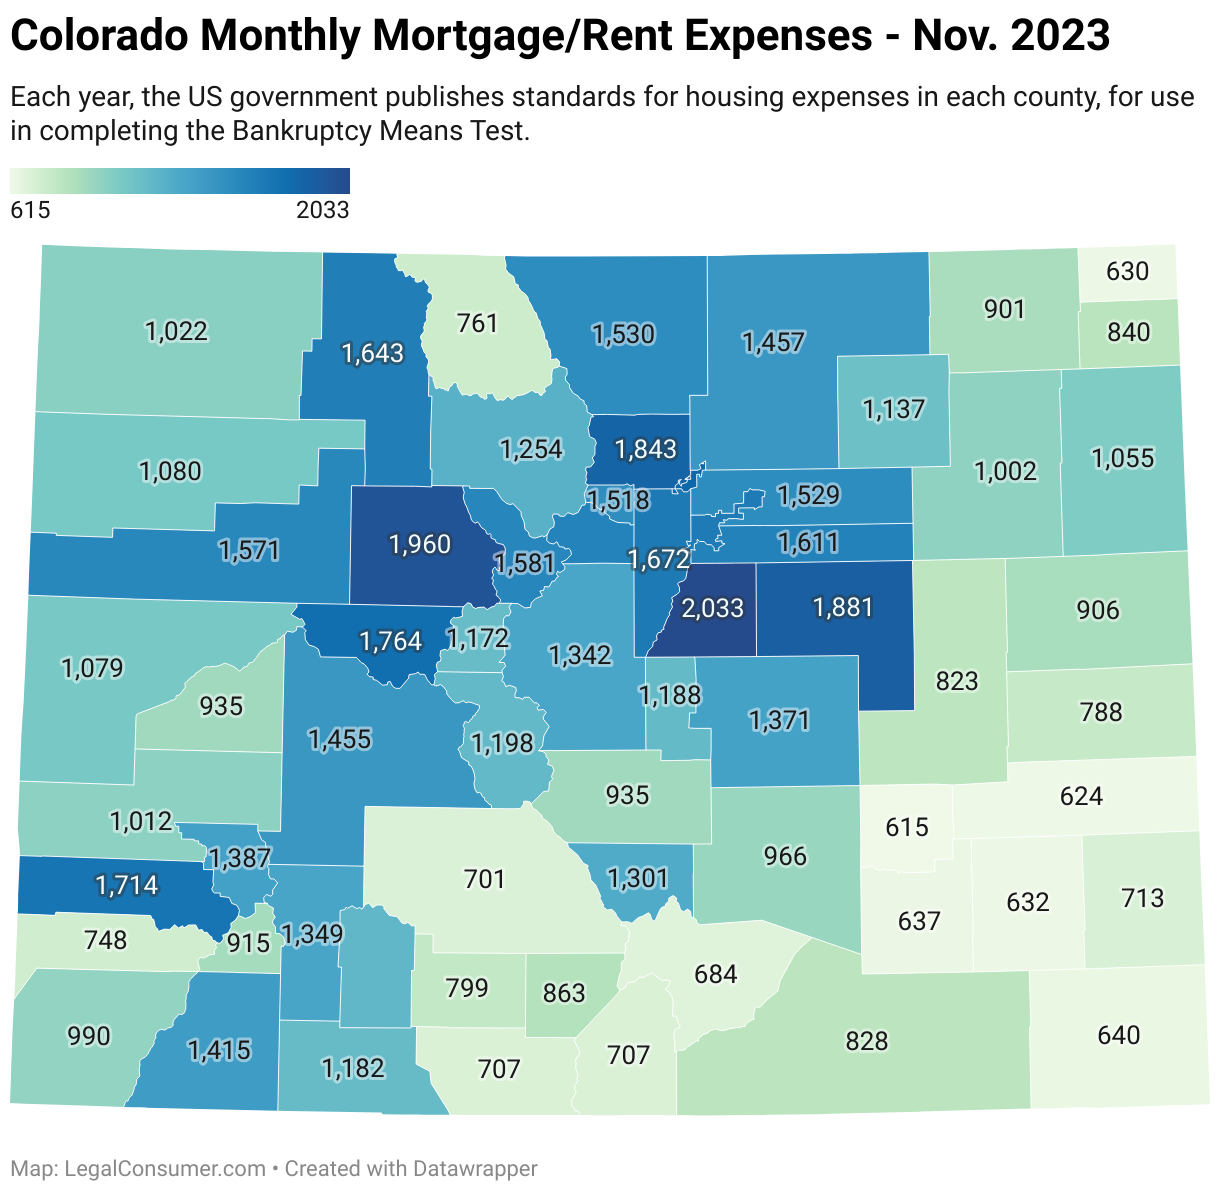 Map of Colorado Housing Expenses for Bankruptcy Means Test